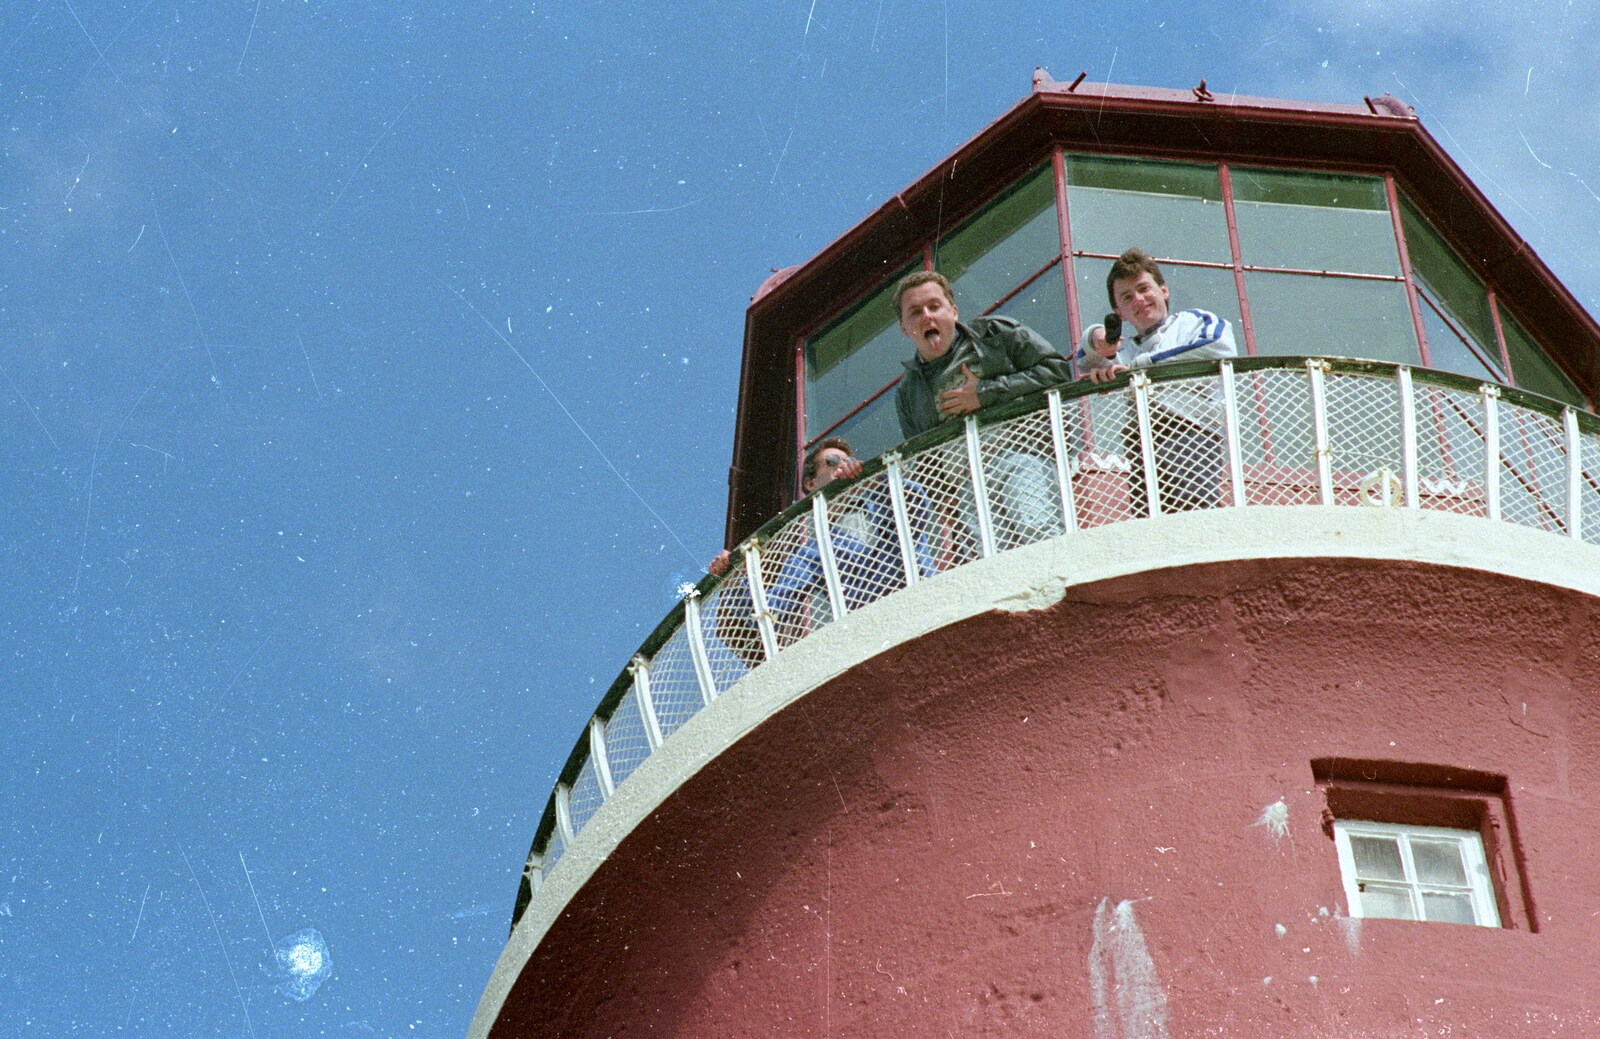 Chris, Andy and John Stuart at the top of Smeaton's Tower from Uni: Scenes of Plymouth and the PPSU Bar, Plymouth Polytechnic, Devon - 28th April 1986